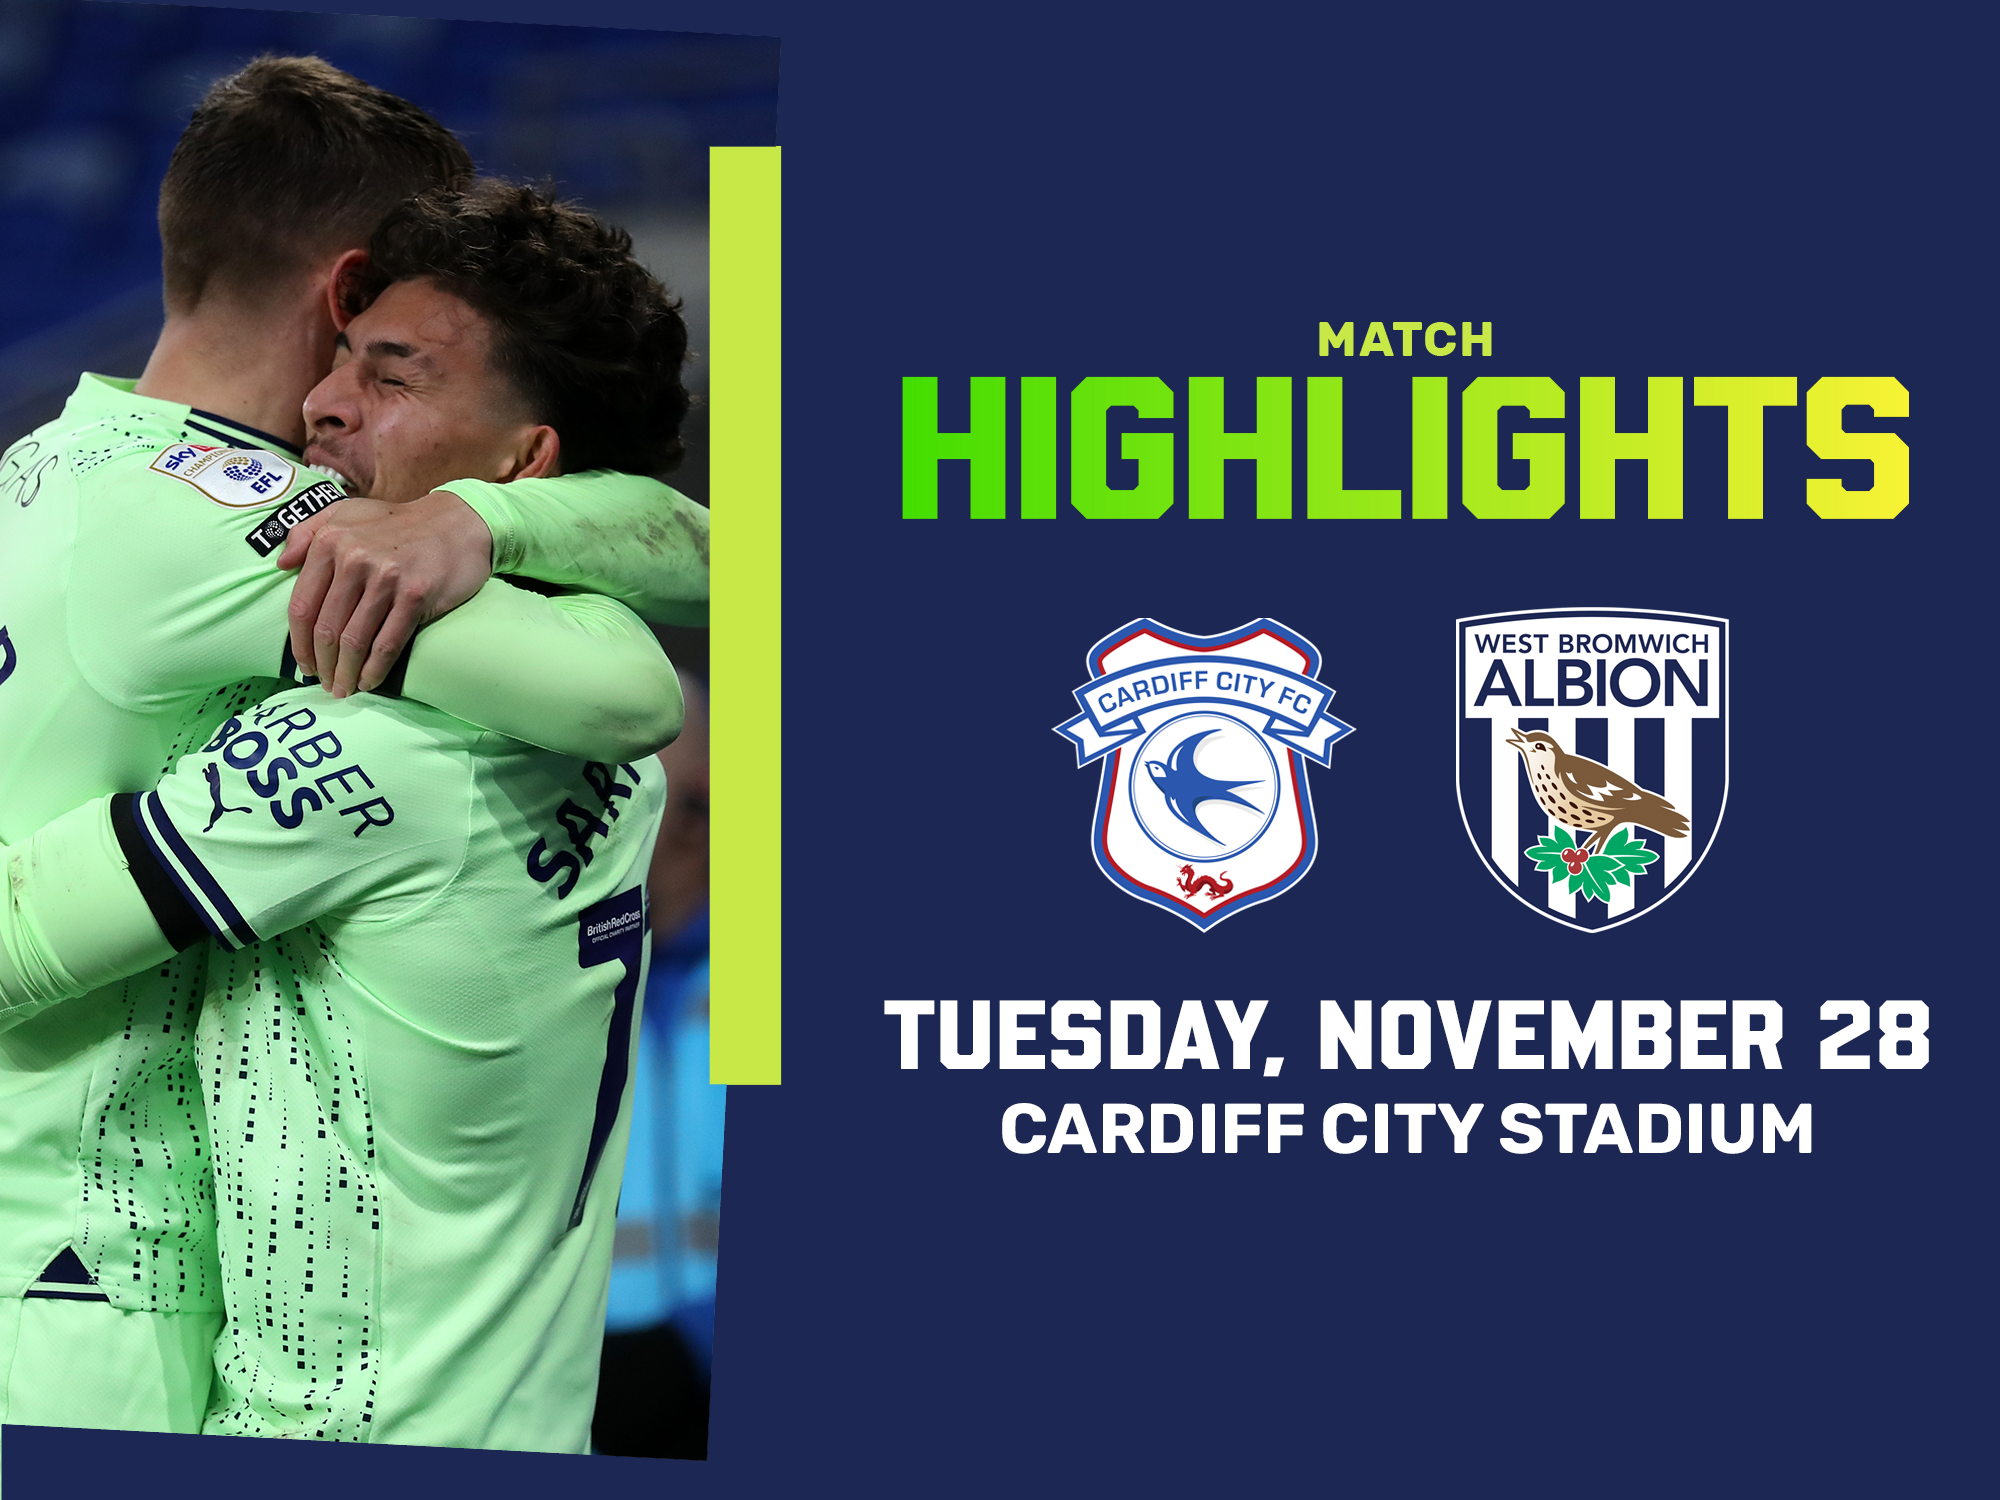 A highlights photo graphic, in the 23/24 lime green away colours showing Jeremy Sarmiento and Conor Townsend embracing - along with he club crests of Albion and Cardiff City - linking to highlights from the Baggies' win over the Bluebirds